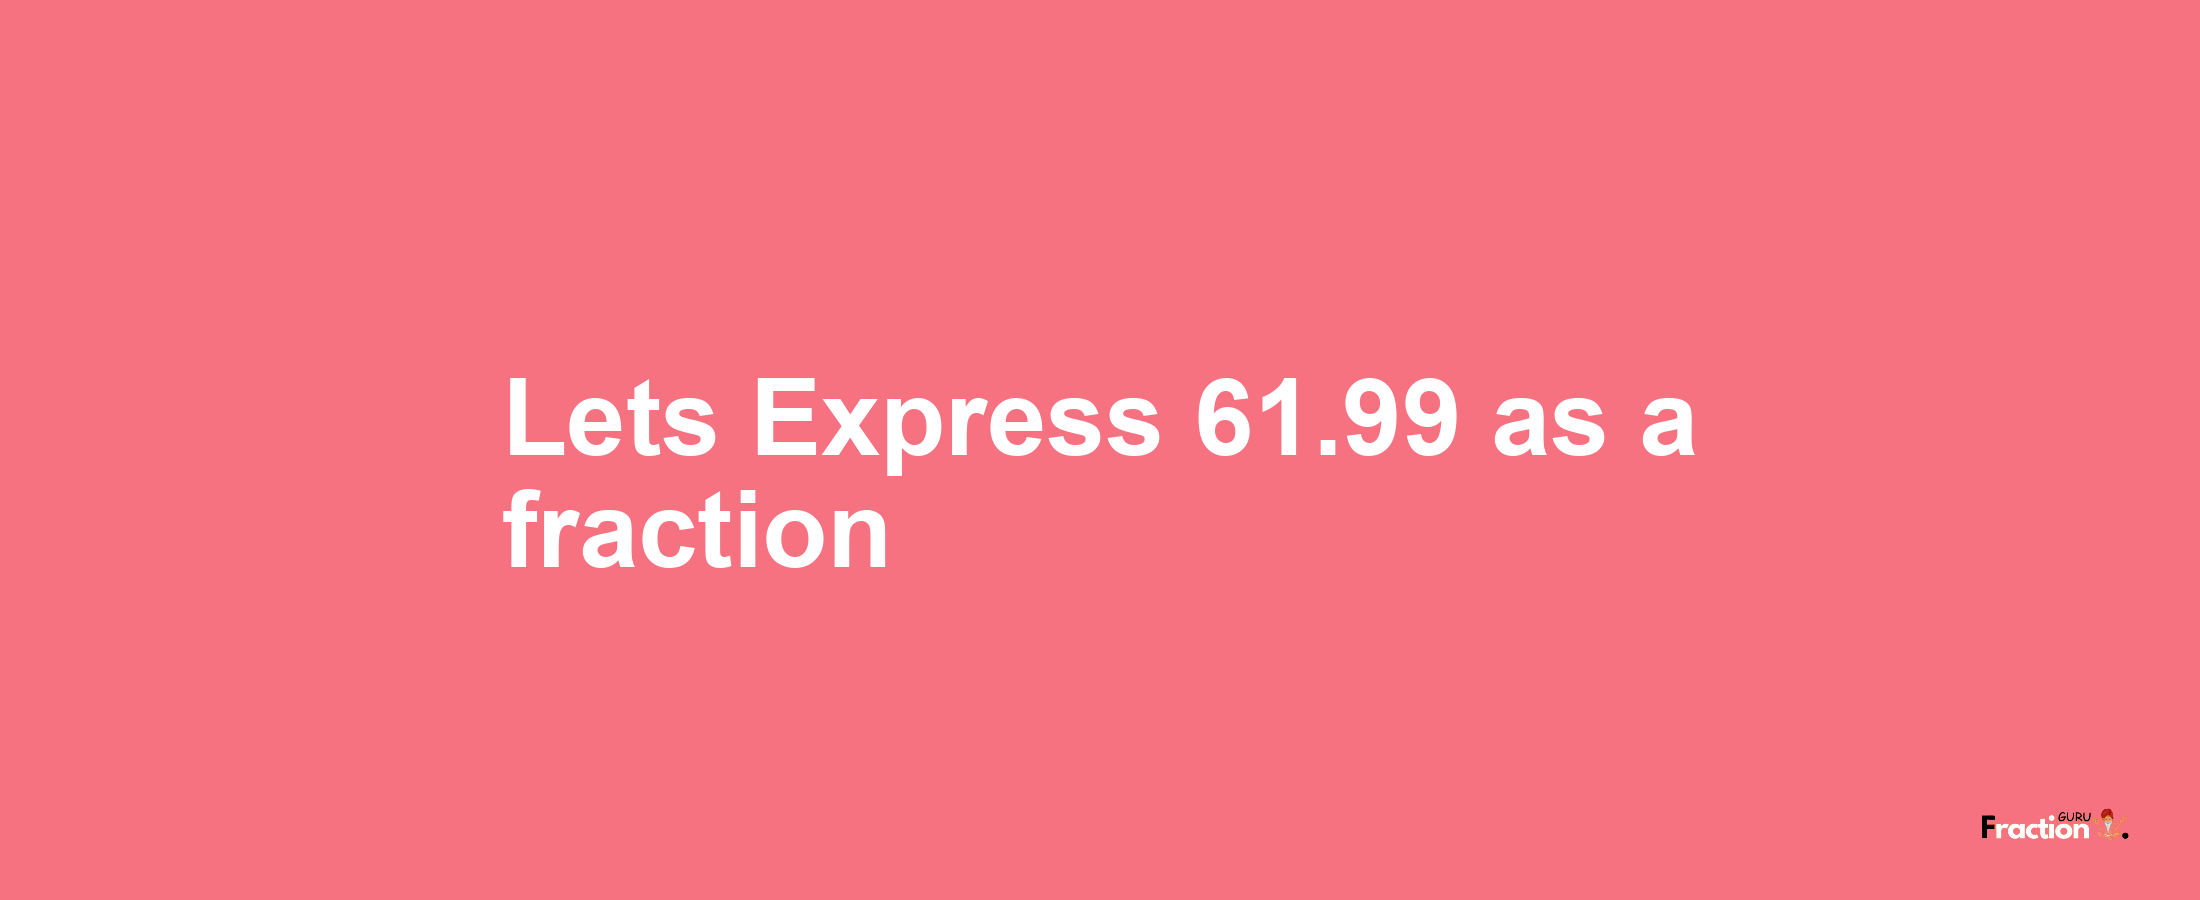 Lets Express 61.99 as afraction